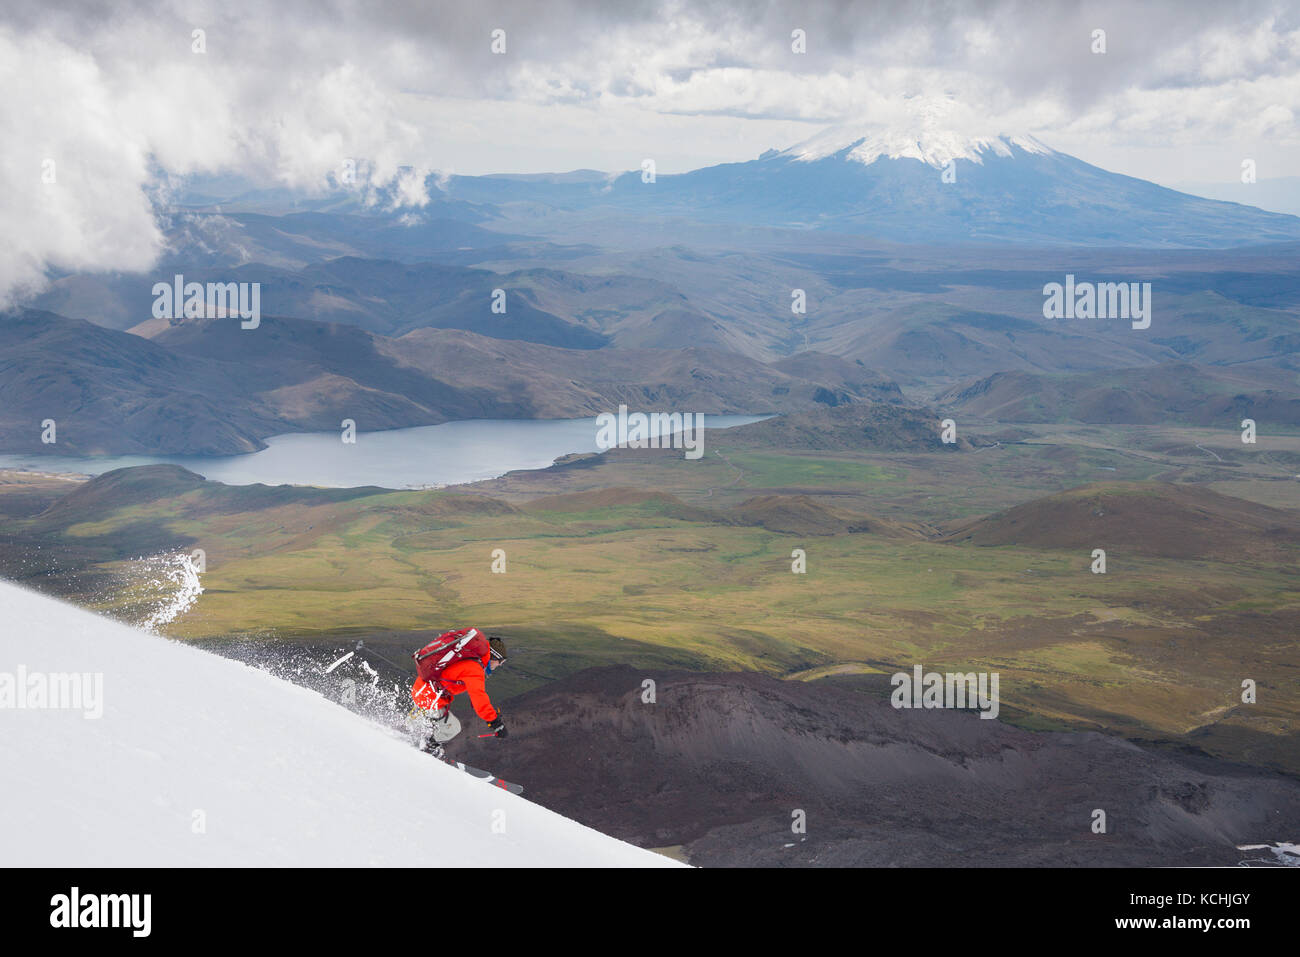 A male skier on a descent down the slopes of Volcan Antisana with Cotopaxi behind, Ecuador Stock Photo